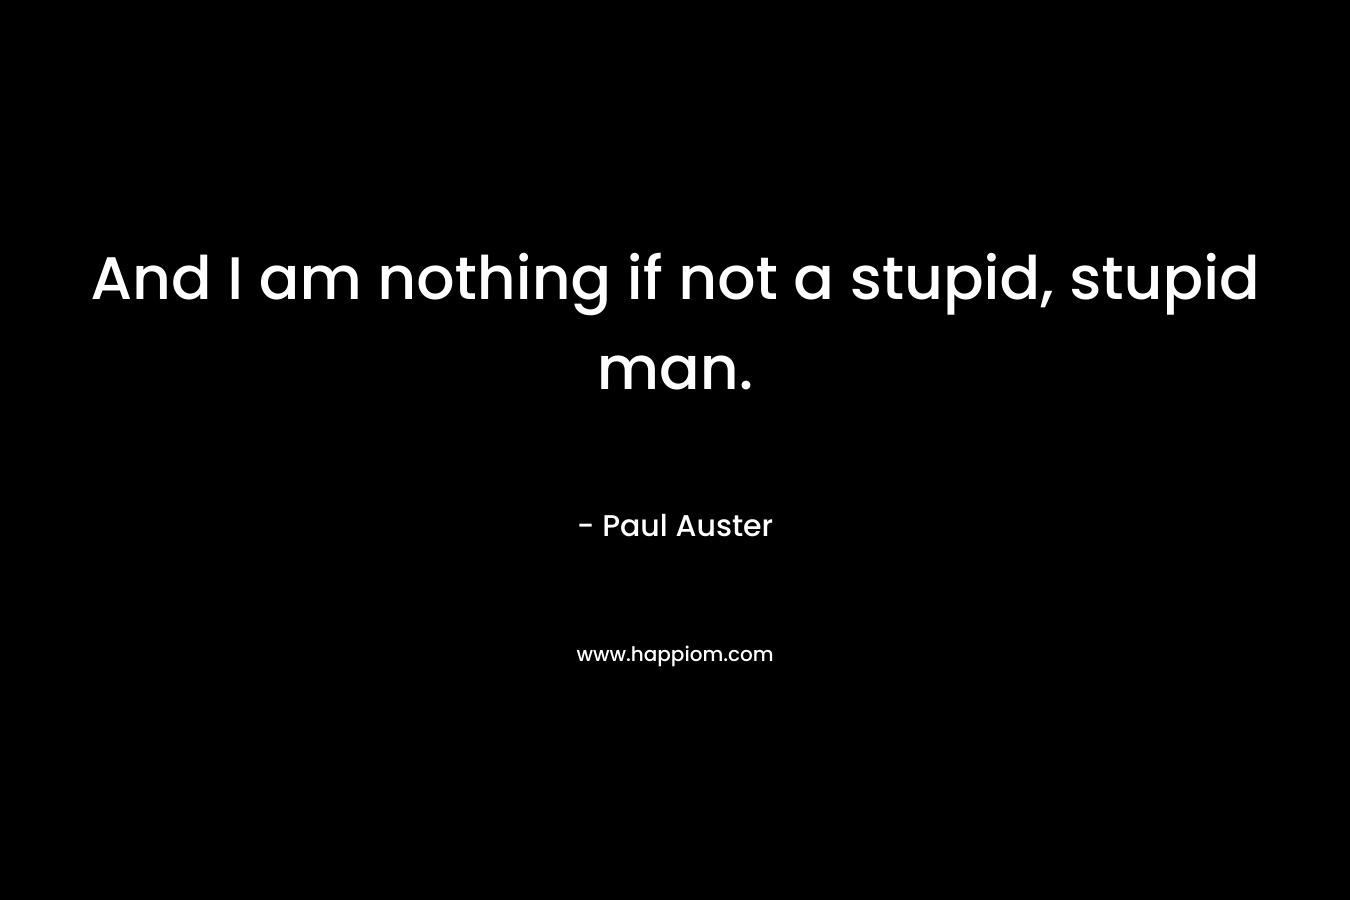 And I am nothing if not a stupid, stupid man.